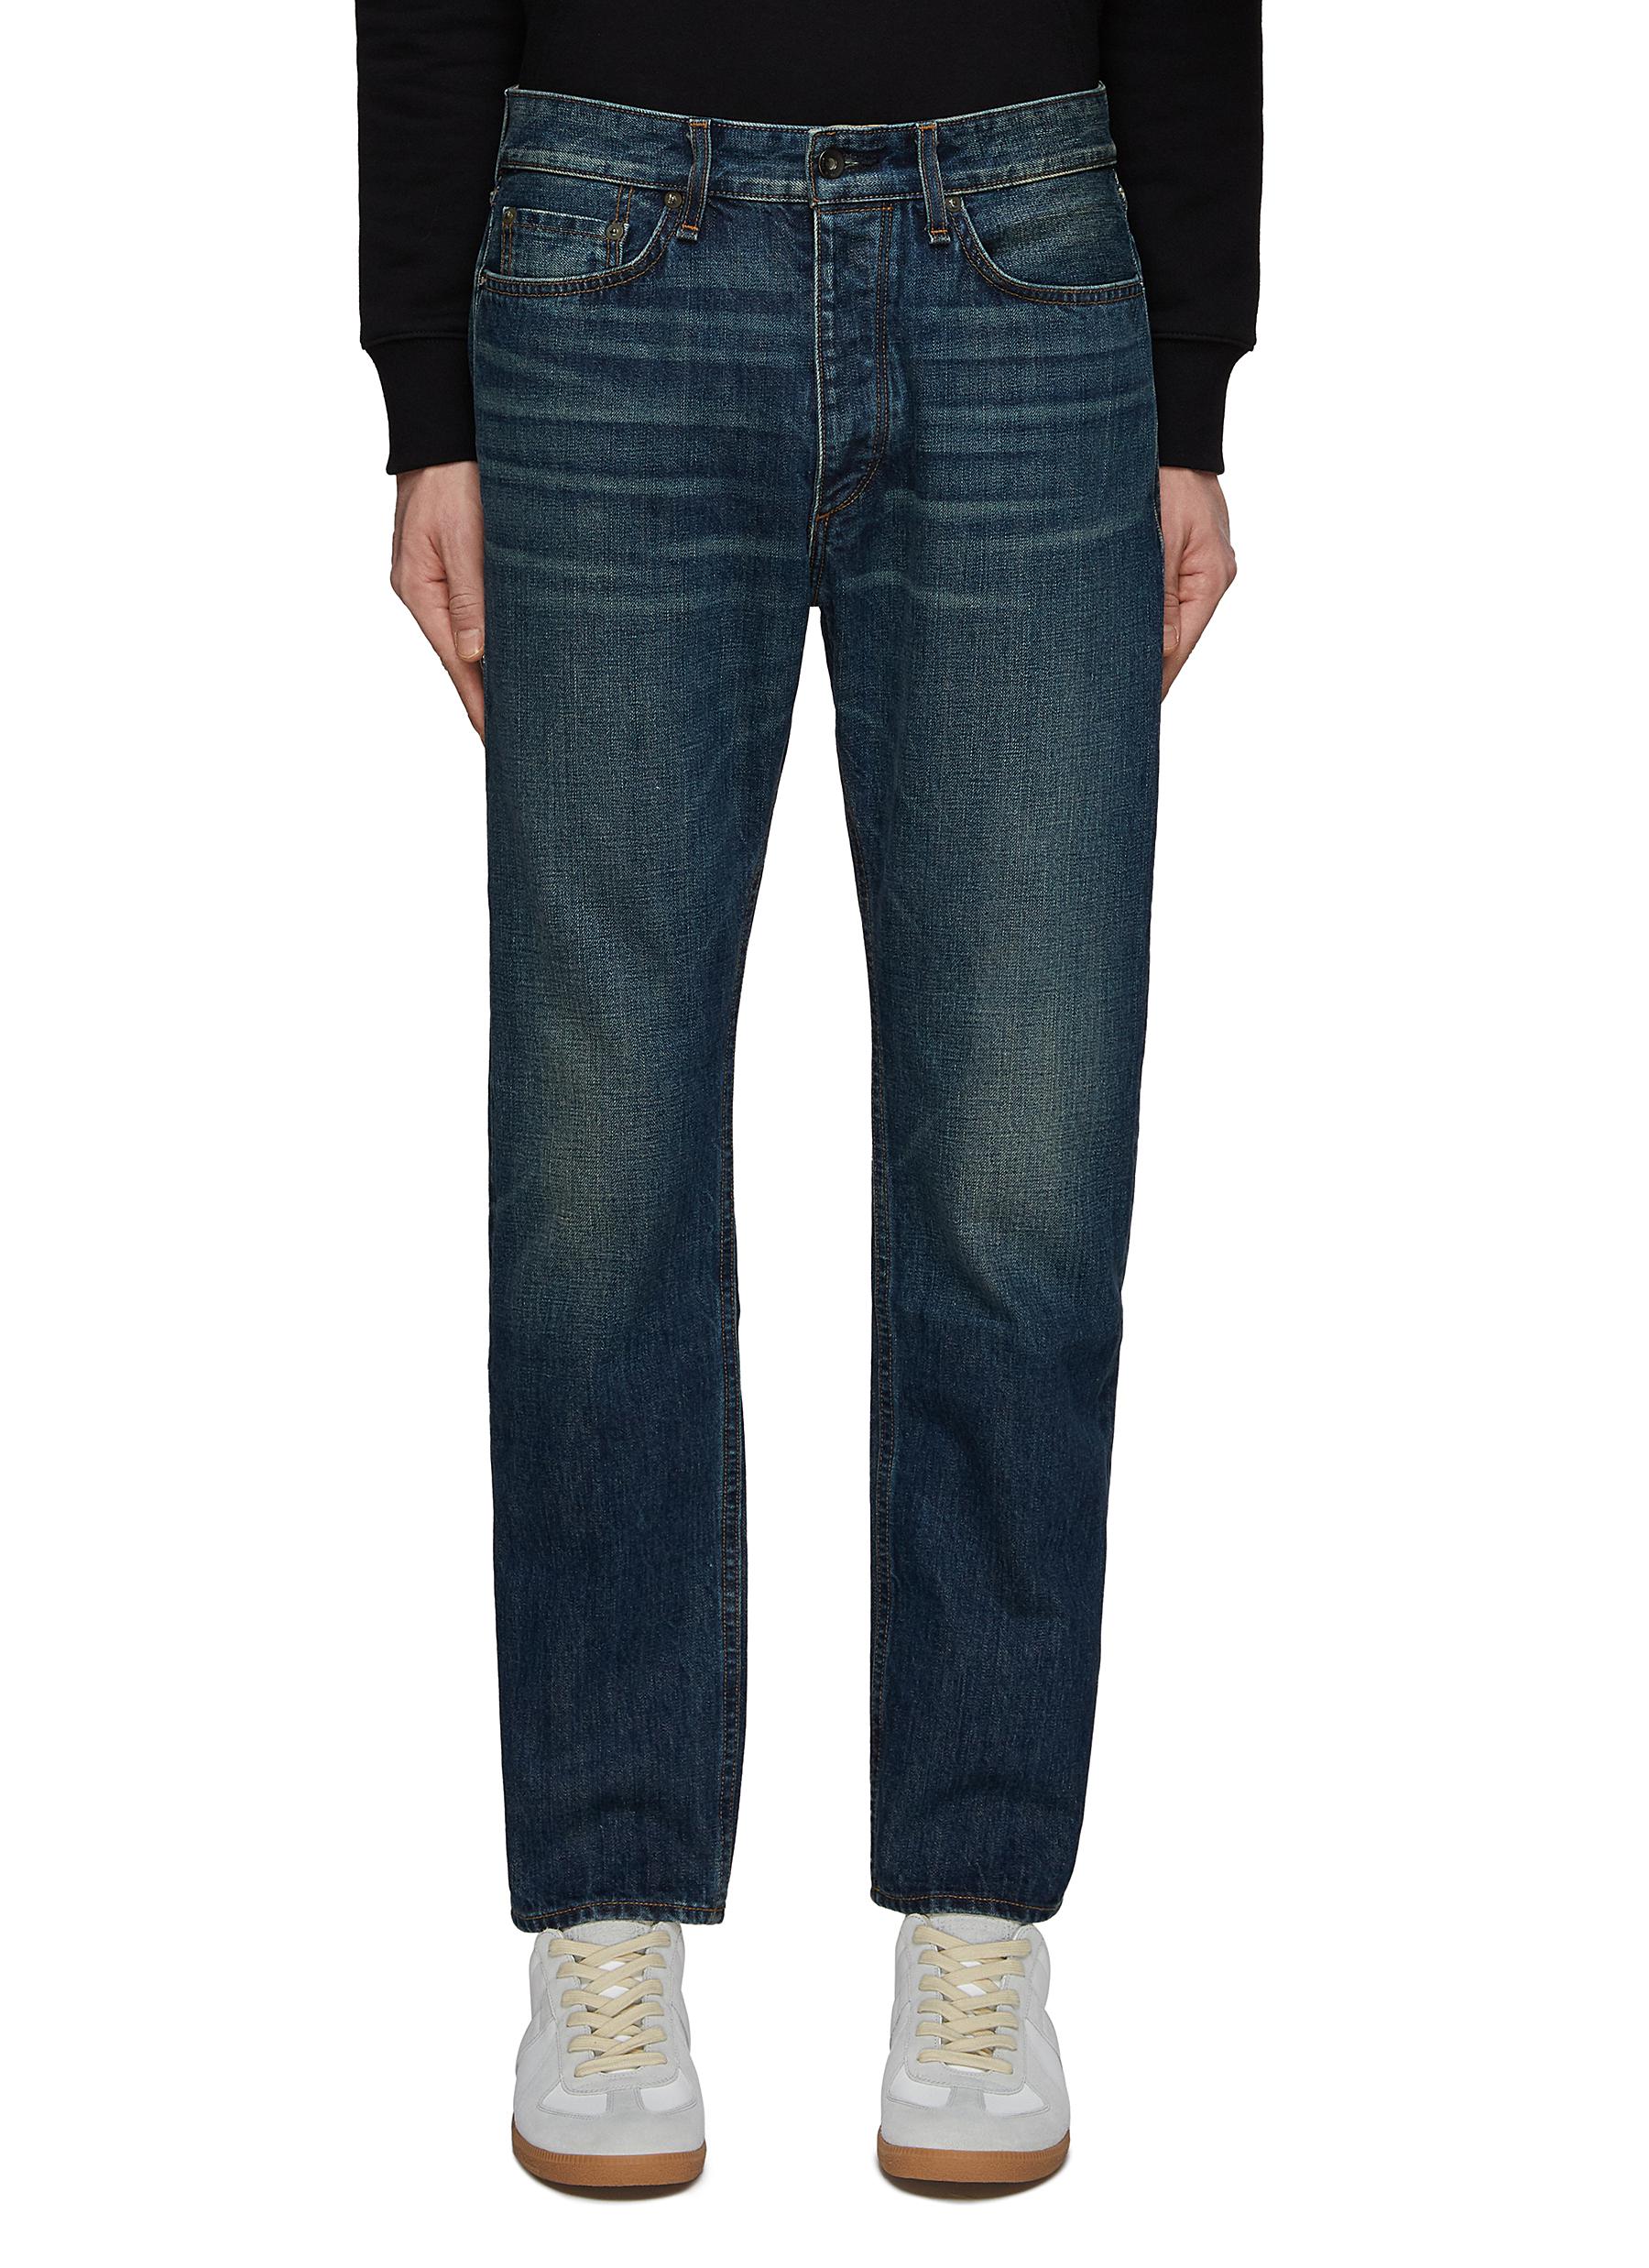 ‘Fit 4' Archive Selvedge Whiskered Dark Wash Straight Leg Jeans